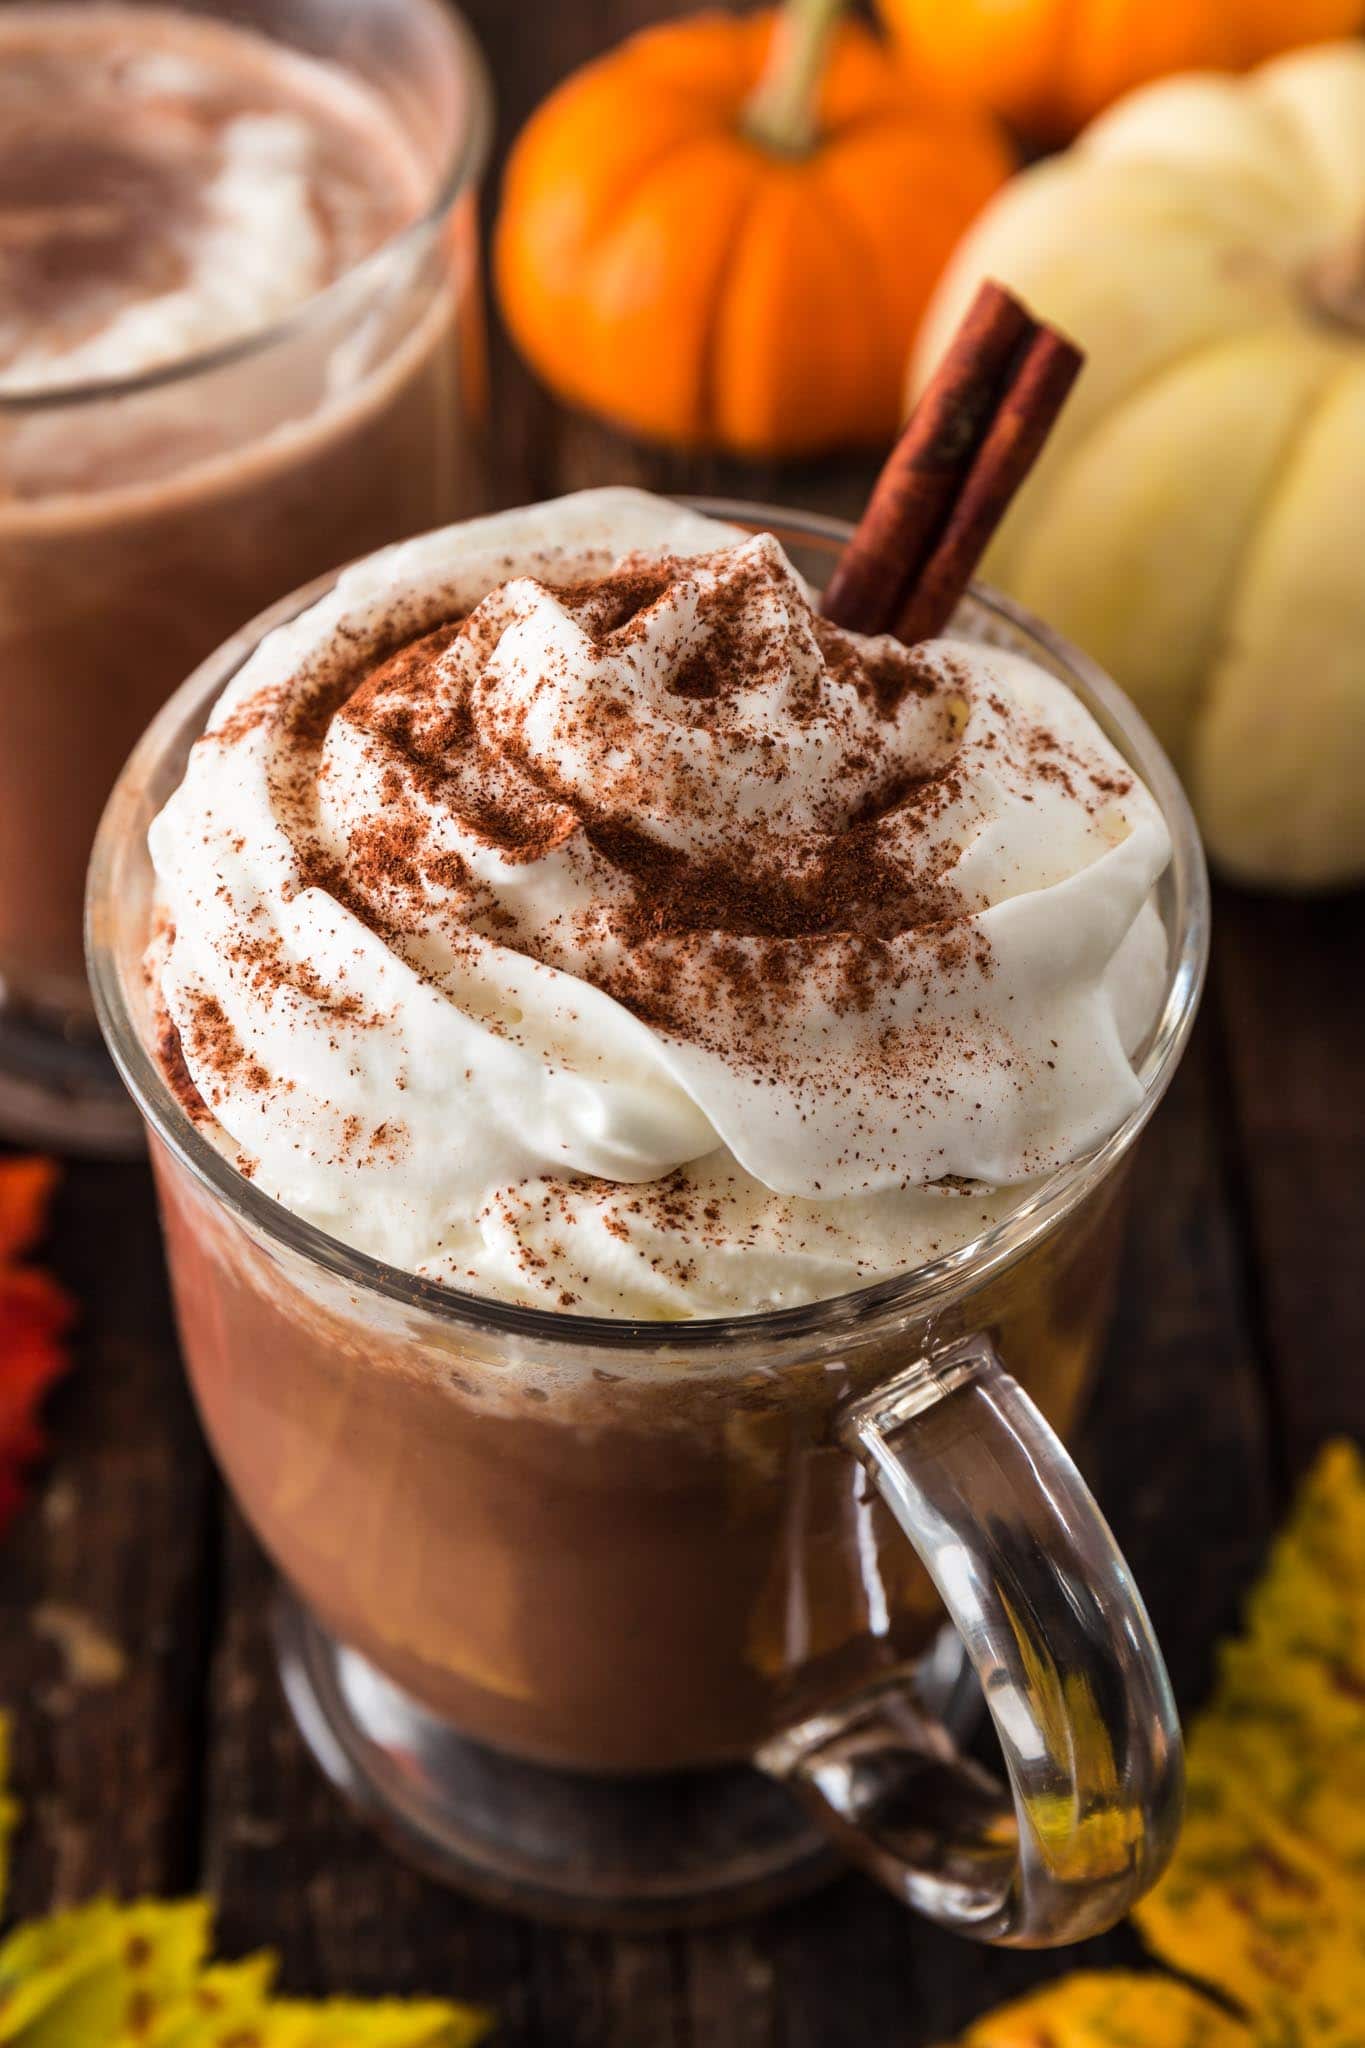 Pumpkin Spice Hot Chocolate | www.oliviascuisine.com | Creamy and extra rich, this Pumpkin Spice Hot Chocolate tastes like Fall in a cup. I can't think of a better way to celebrate the season! (Recipe and food photography by @oliviascuisine.)